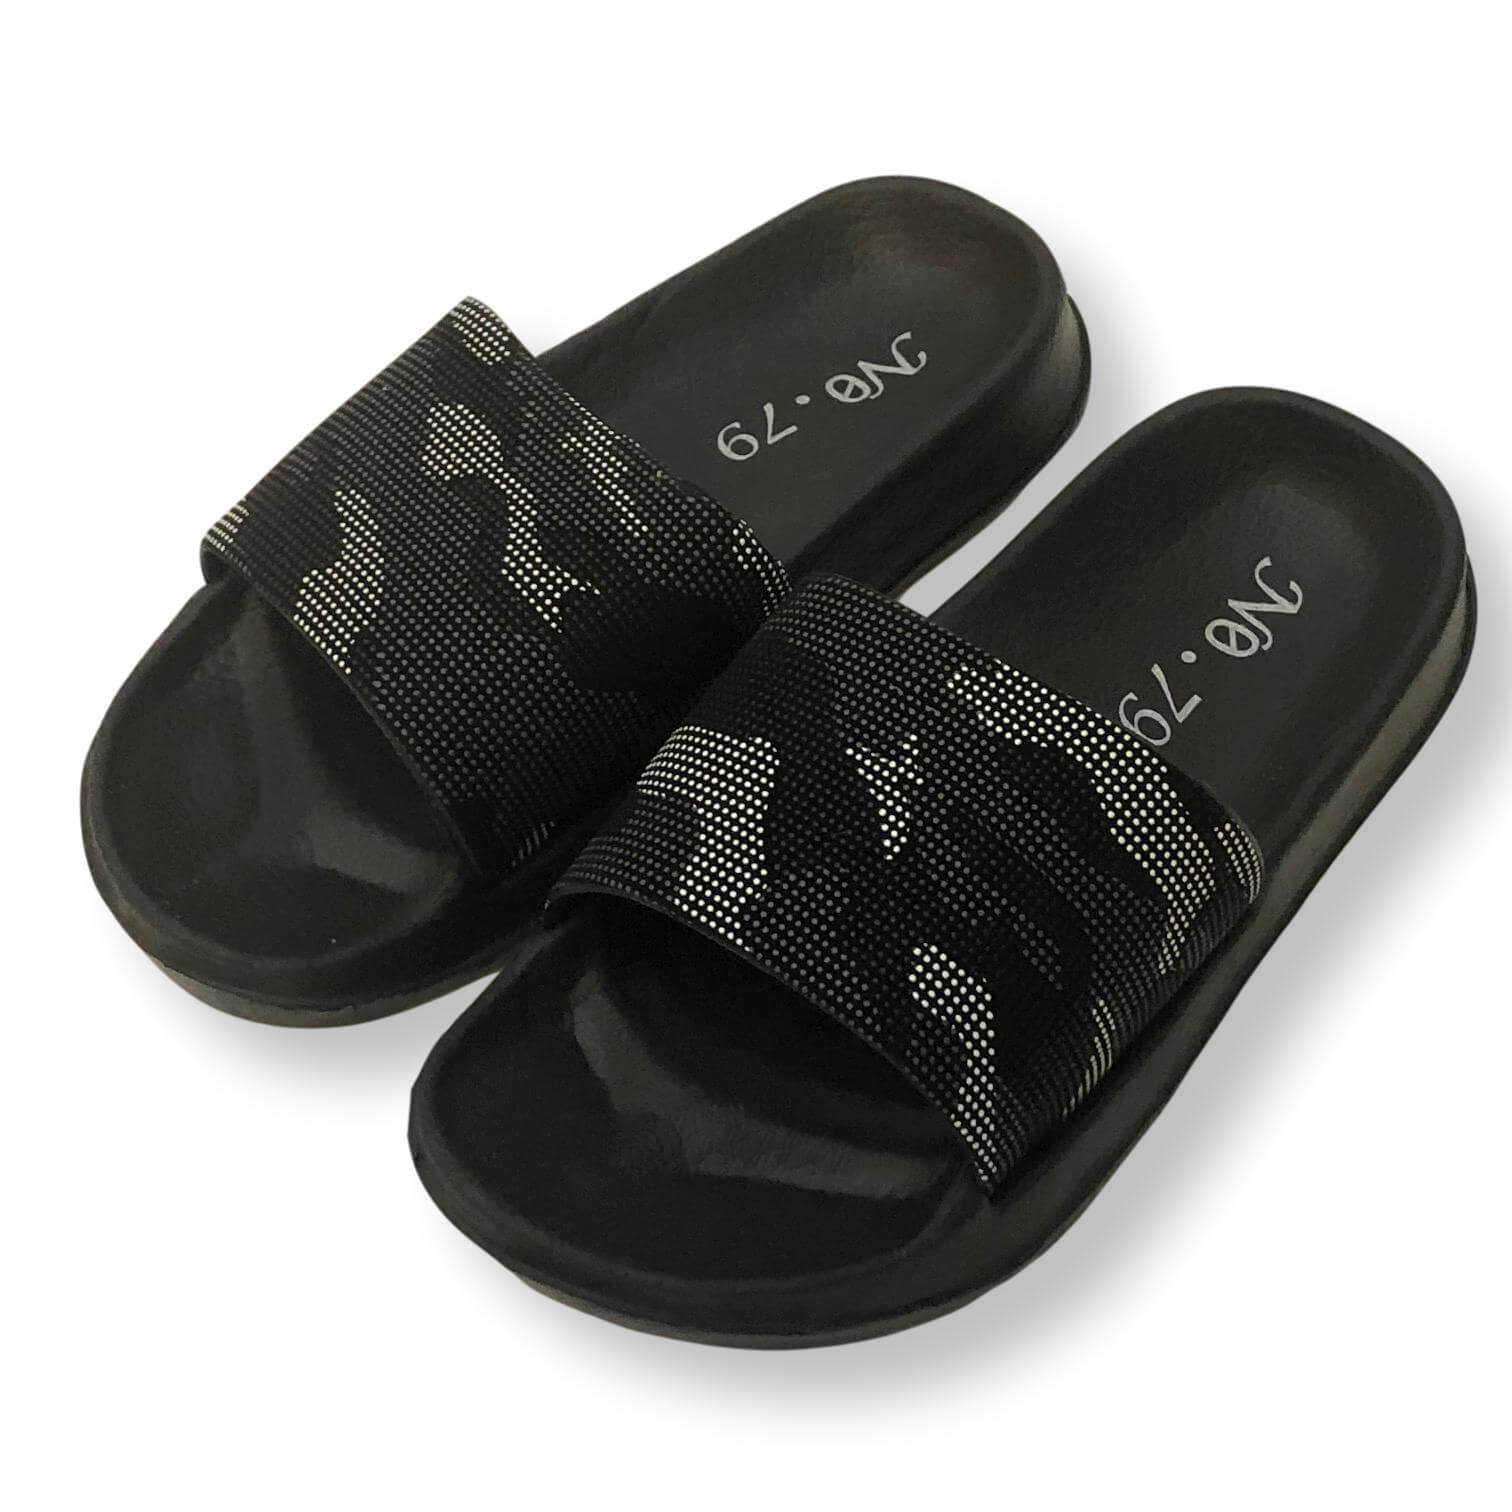 Toddler/Little Kid Boys Beach/Pool Flip Flops Sandals with Ankle Strap 